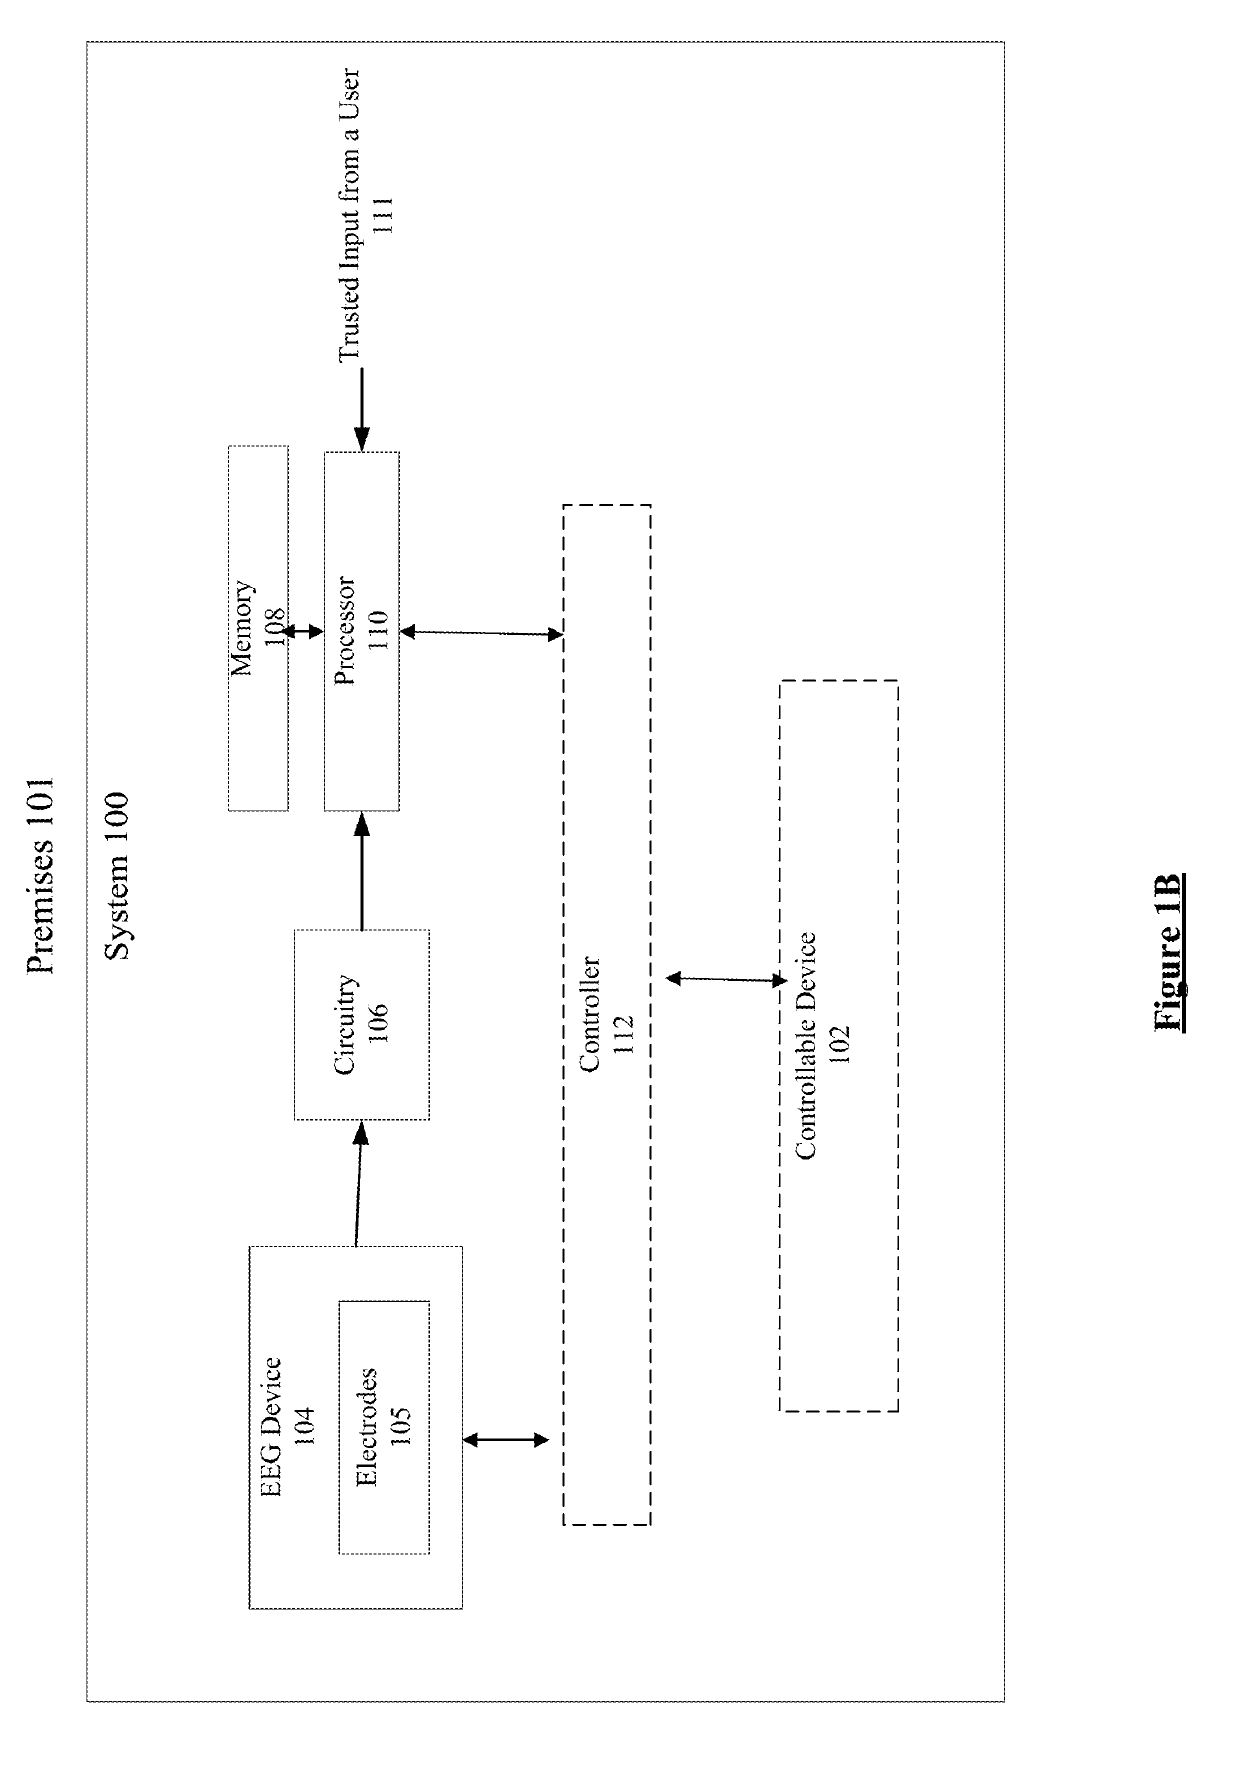 User preference and user hierarchy in an electroencephalography based control system